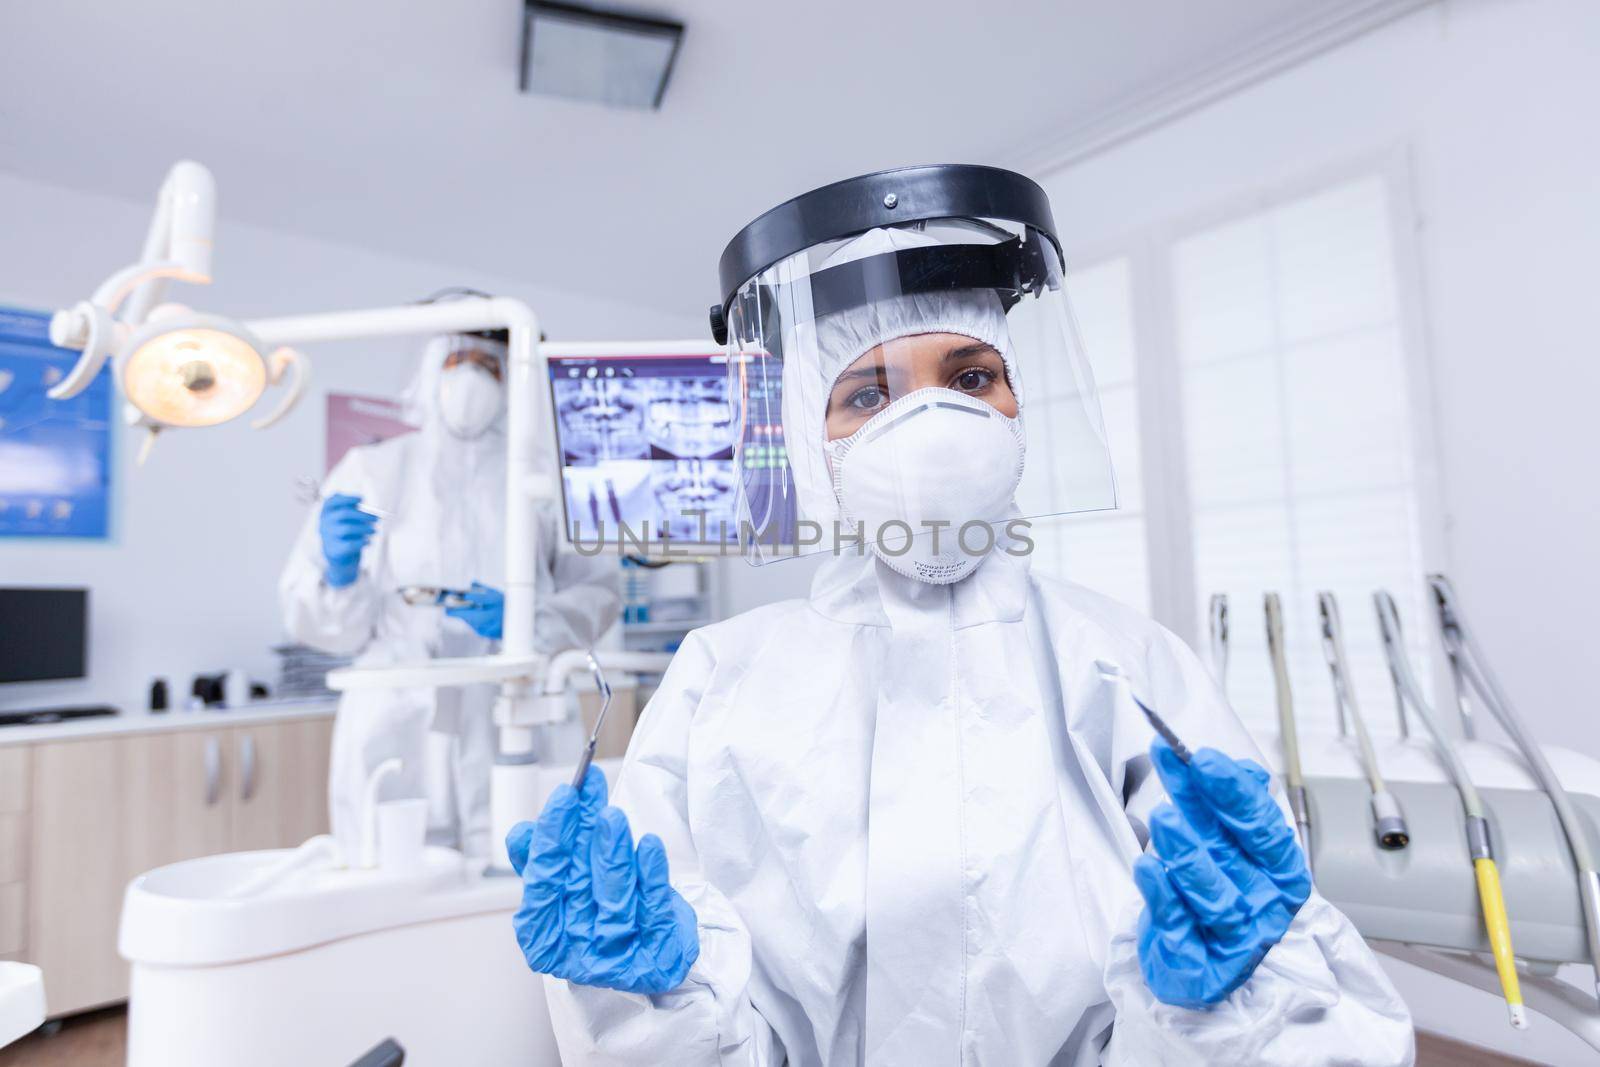 Patient pov of dentist in covid protectiv suit with her tools in dental office. Stomatolog wearing safety gear against coronavirus during heatlhcare check of patient.